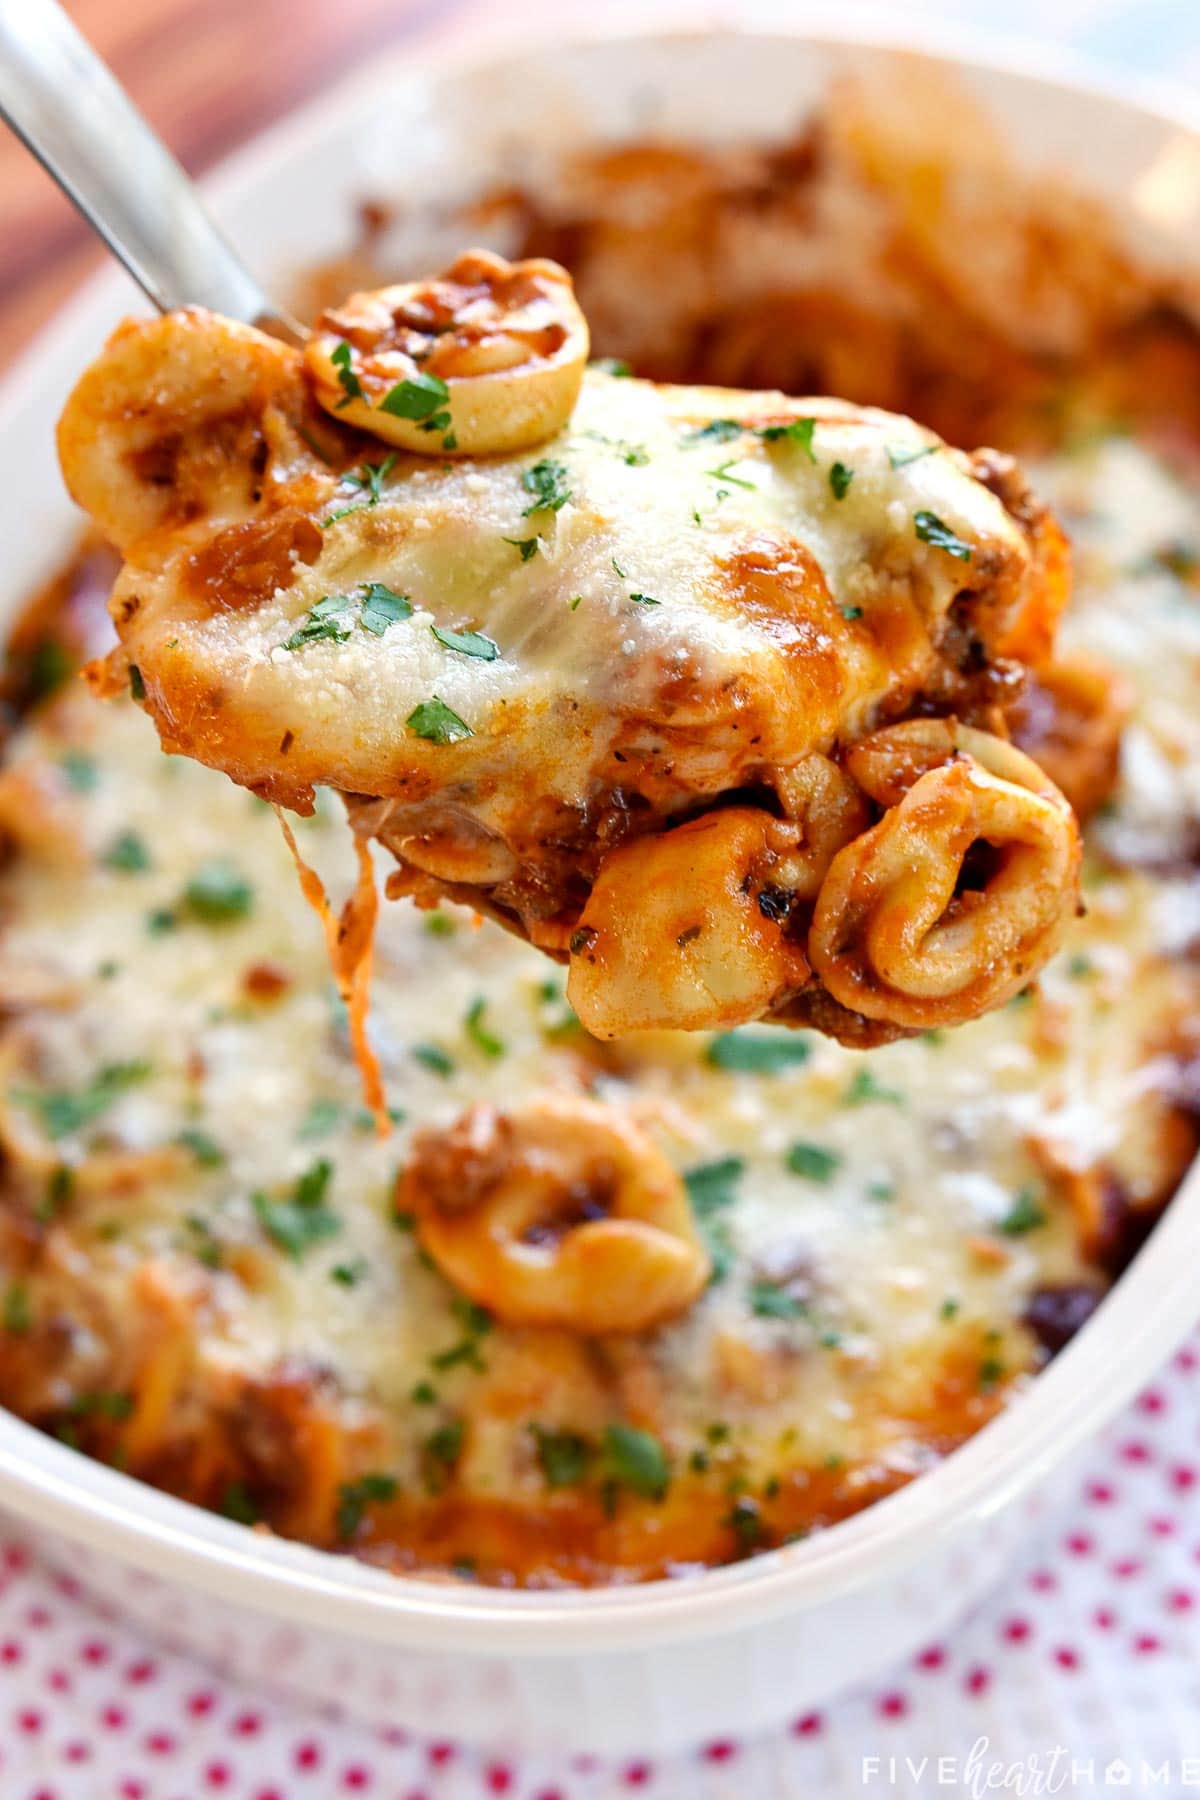 Baked Tortellini being scooped out of dish.